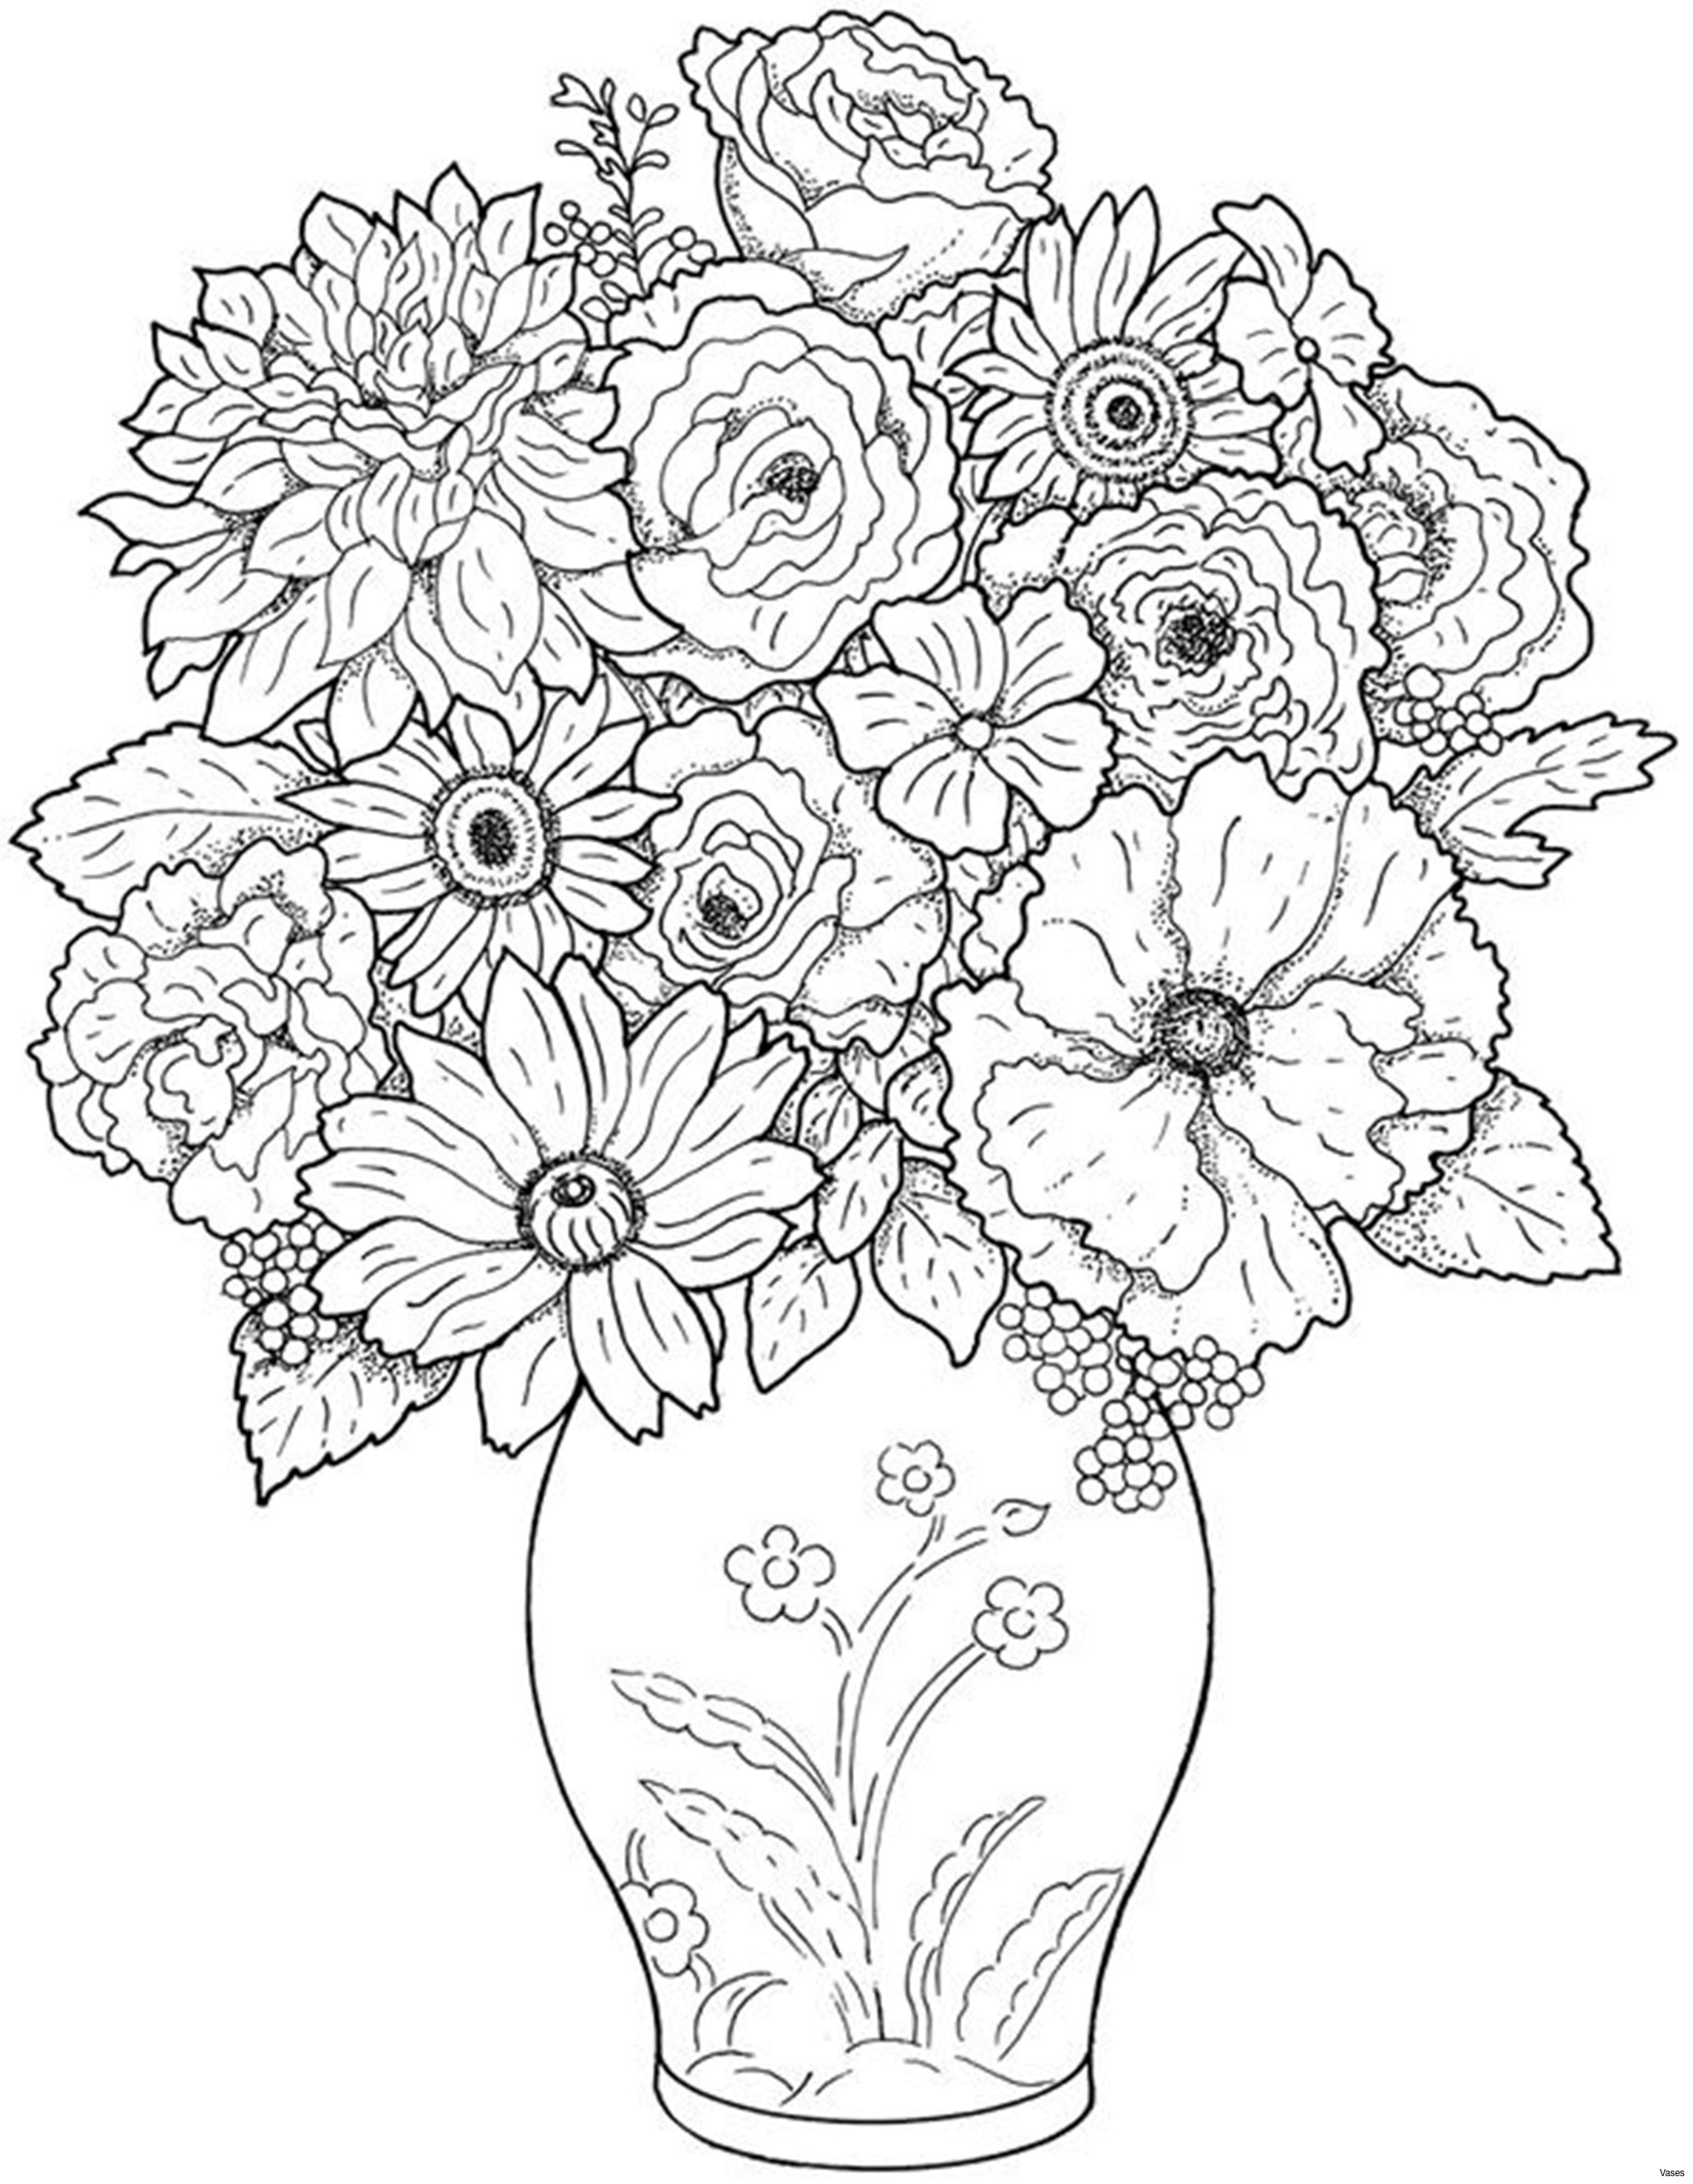 10 Cute Grave Vases for Flowers 2024 free download grave vases for flowers of coloring pages of flowers in a vase free coloring library regarding coloring vase with flowers coloring patterns coloring pages library